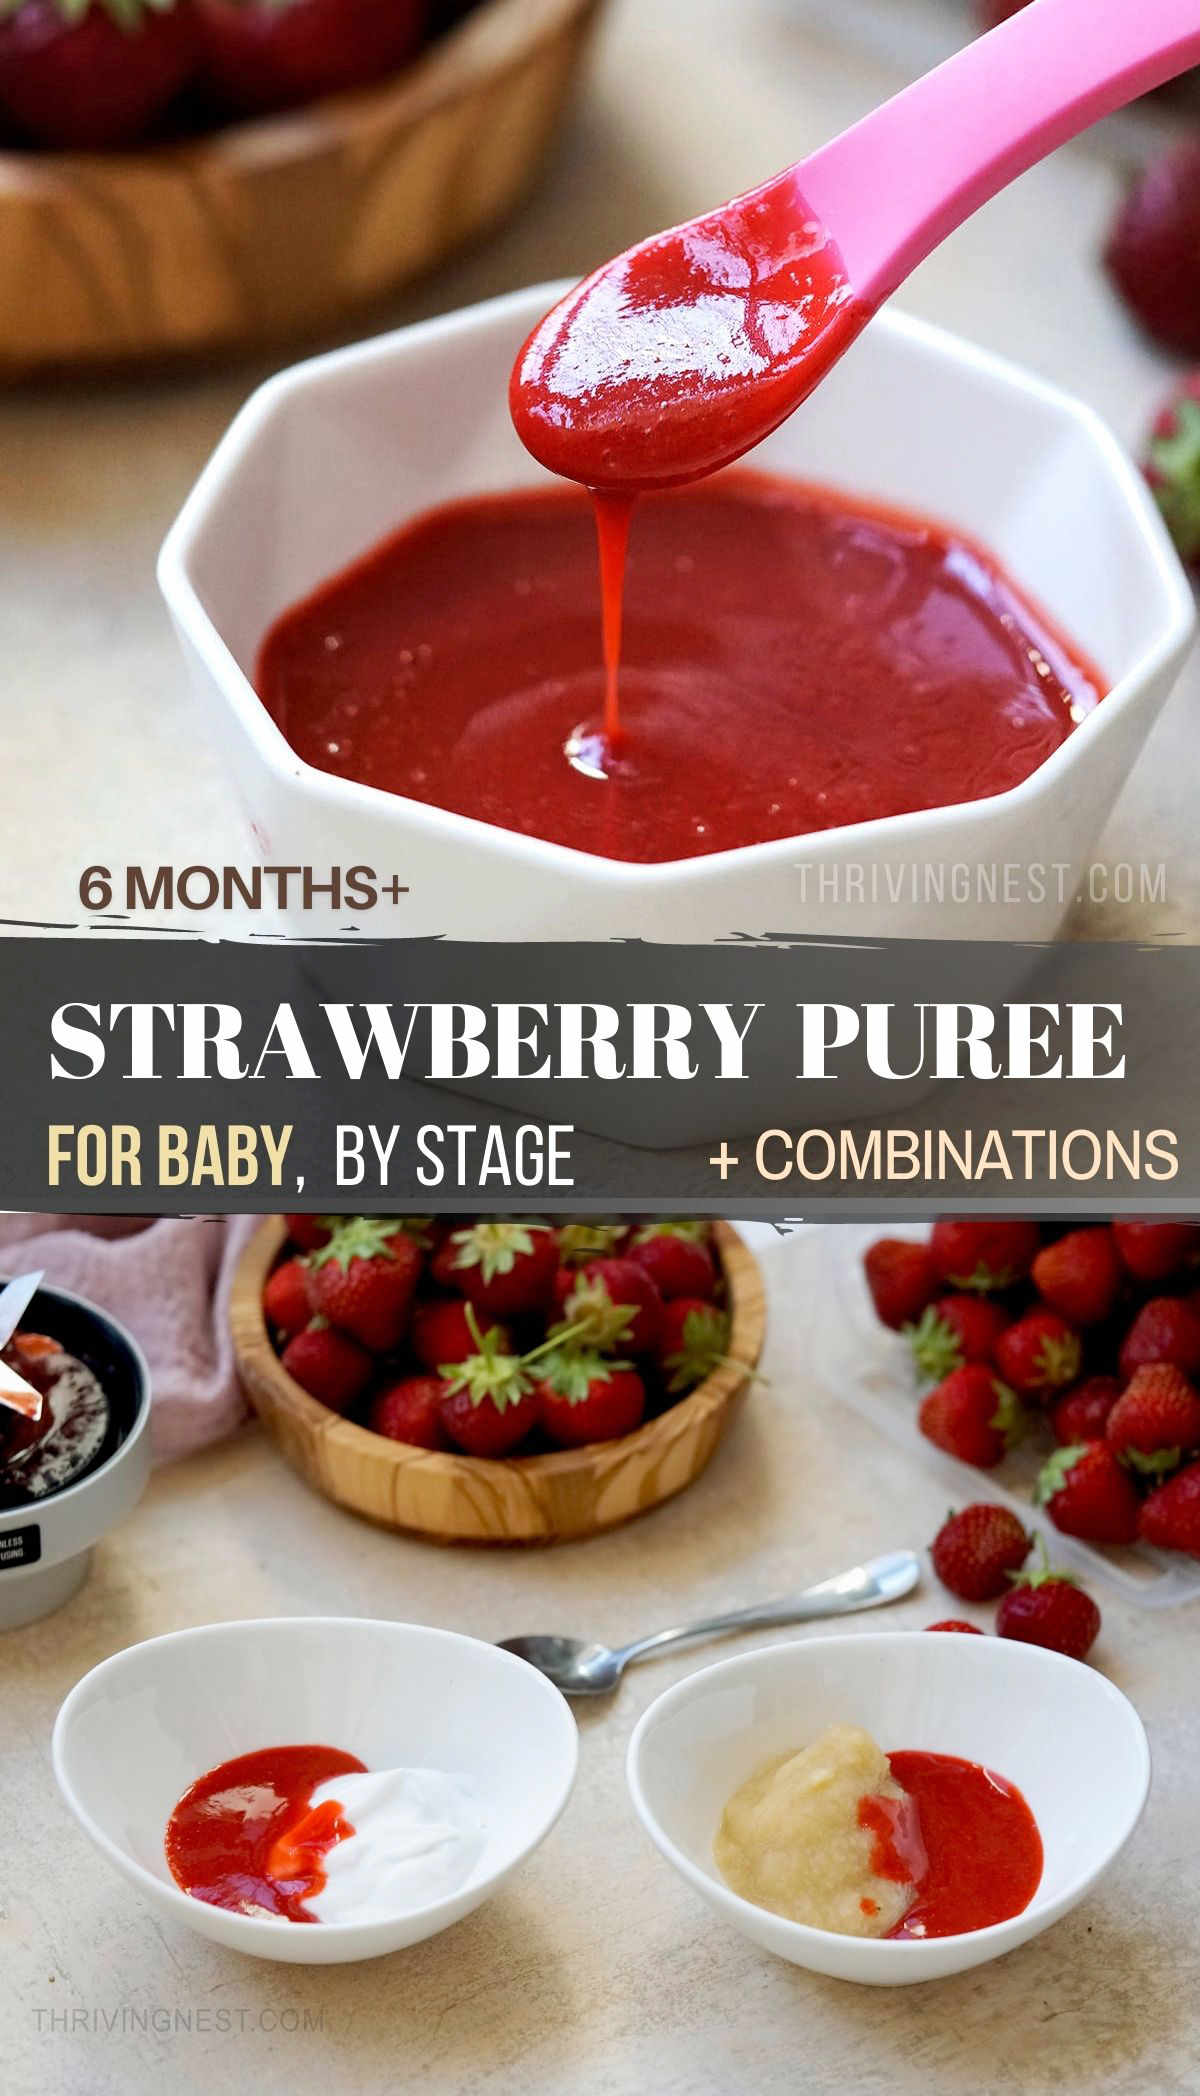 Strawberry puree is a healthy and delicious first baby food that babies 6 months and up can enjoy. You can either make strawberry puree from cooked strawberries or use fresh / frozen strawberries if you want to preserve more nutrients. Serve small portions by itself or mix the strawberry puree with other foods to make delicious puree combinations. #strawberrypuree #babyfood #strawberryforbaby #stage1